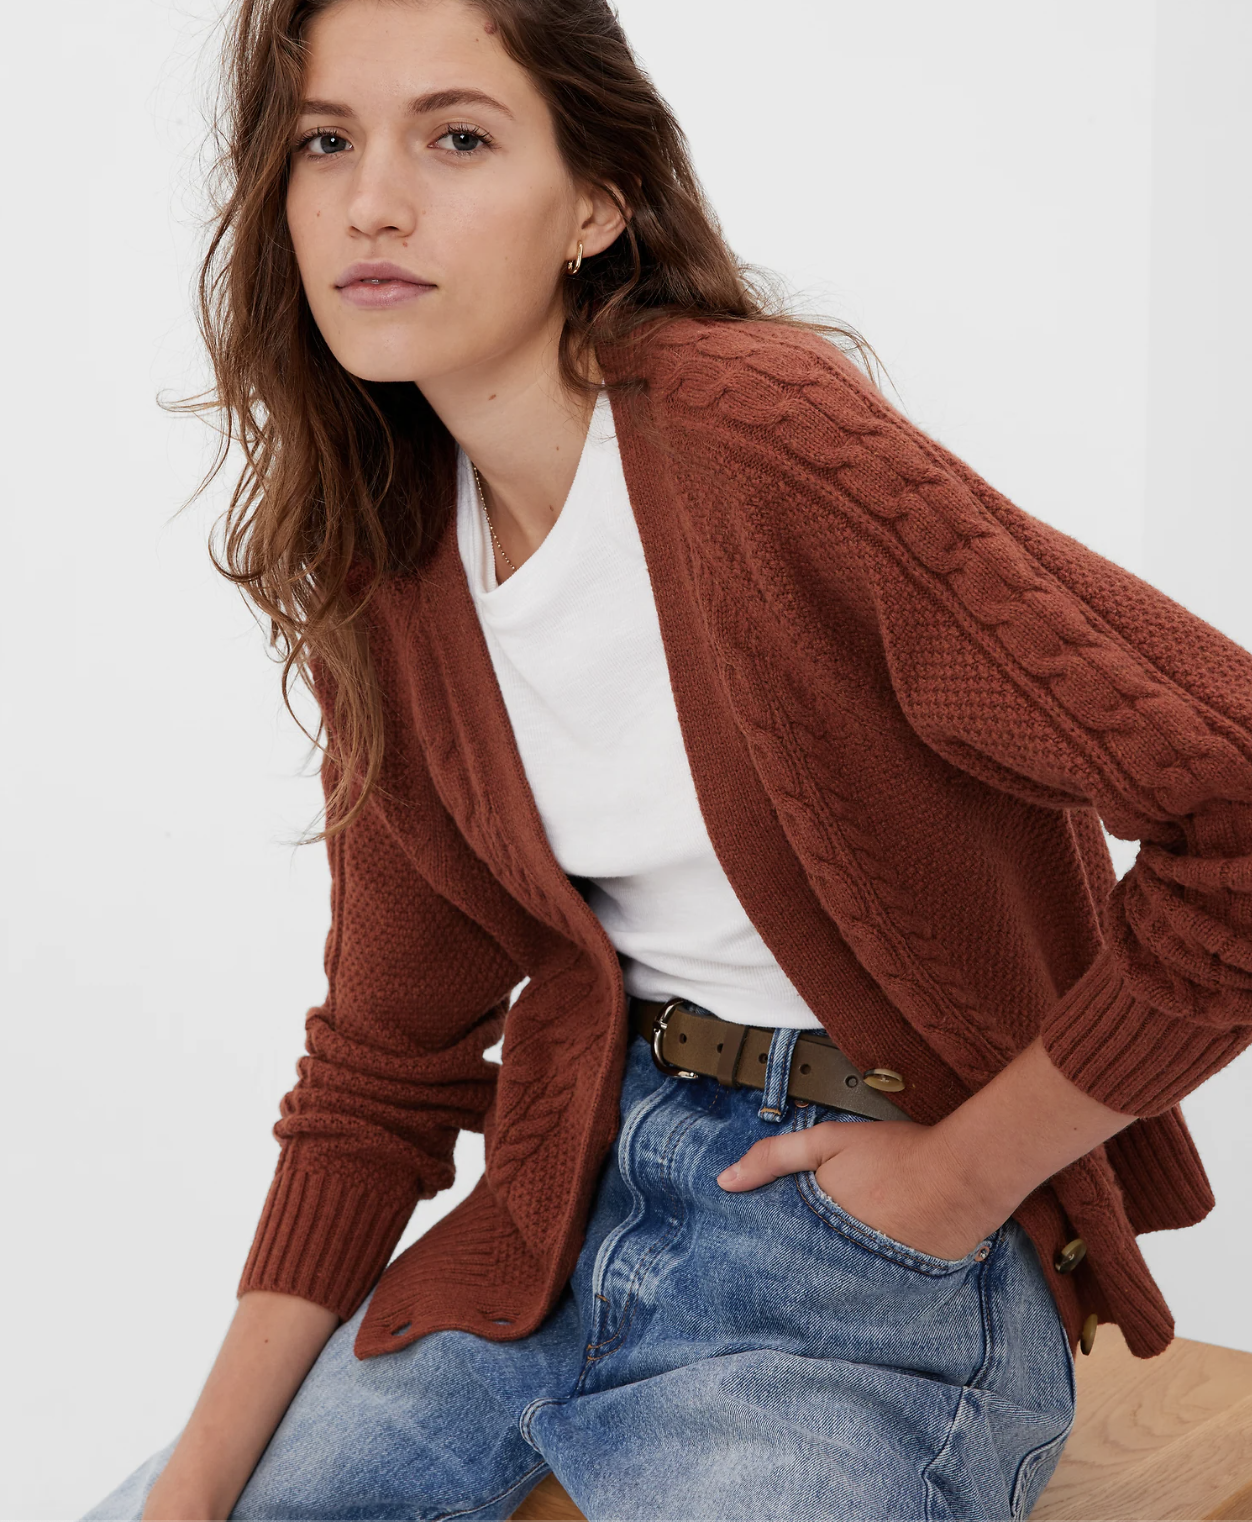 A person wearing the cardigan with jeans and a tee